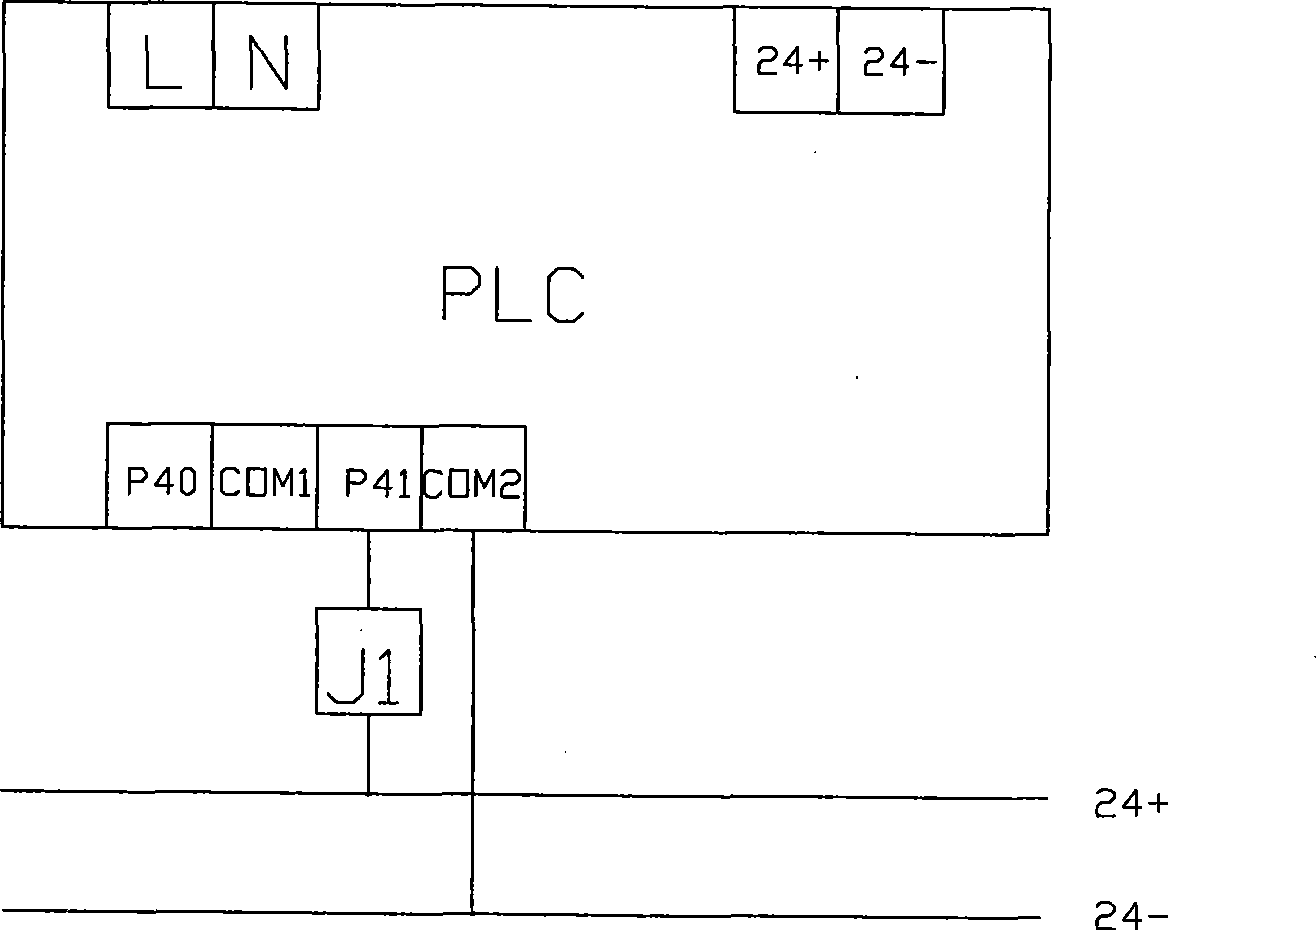 Implementing DC motor positive and negative rotation circuit by PLC-controlled relay